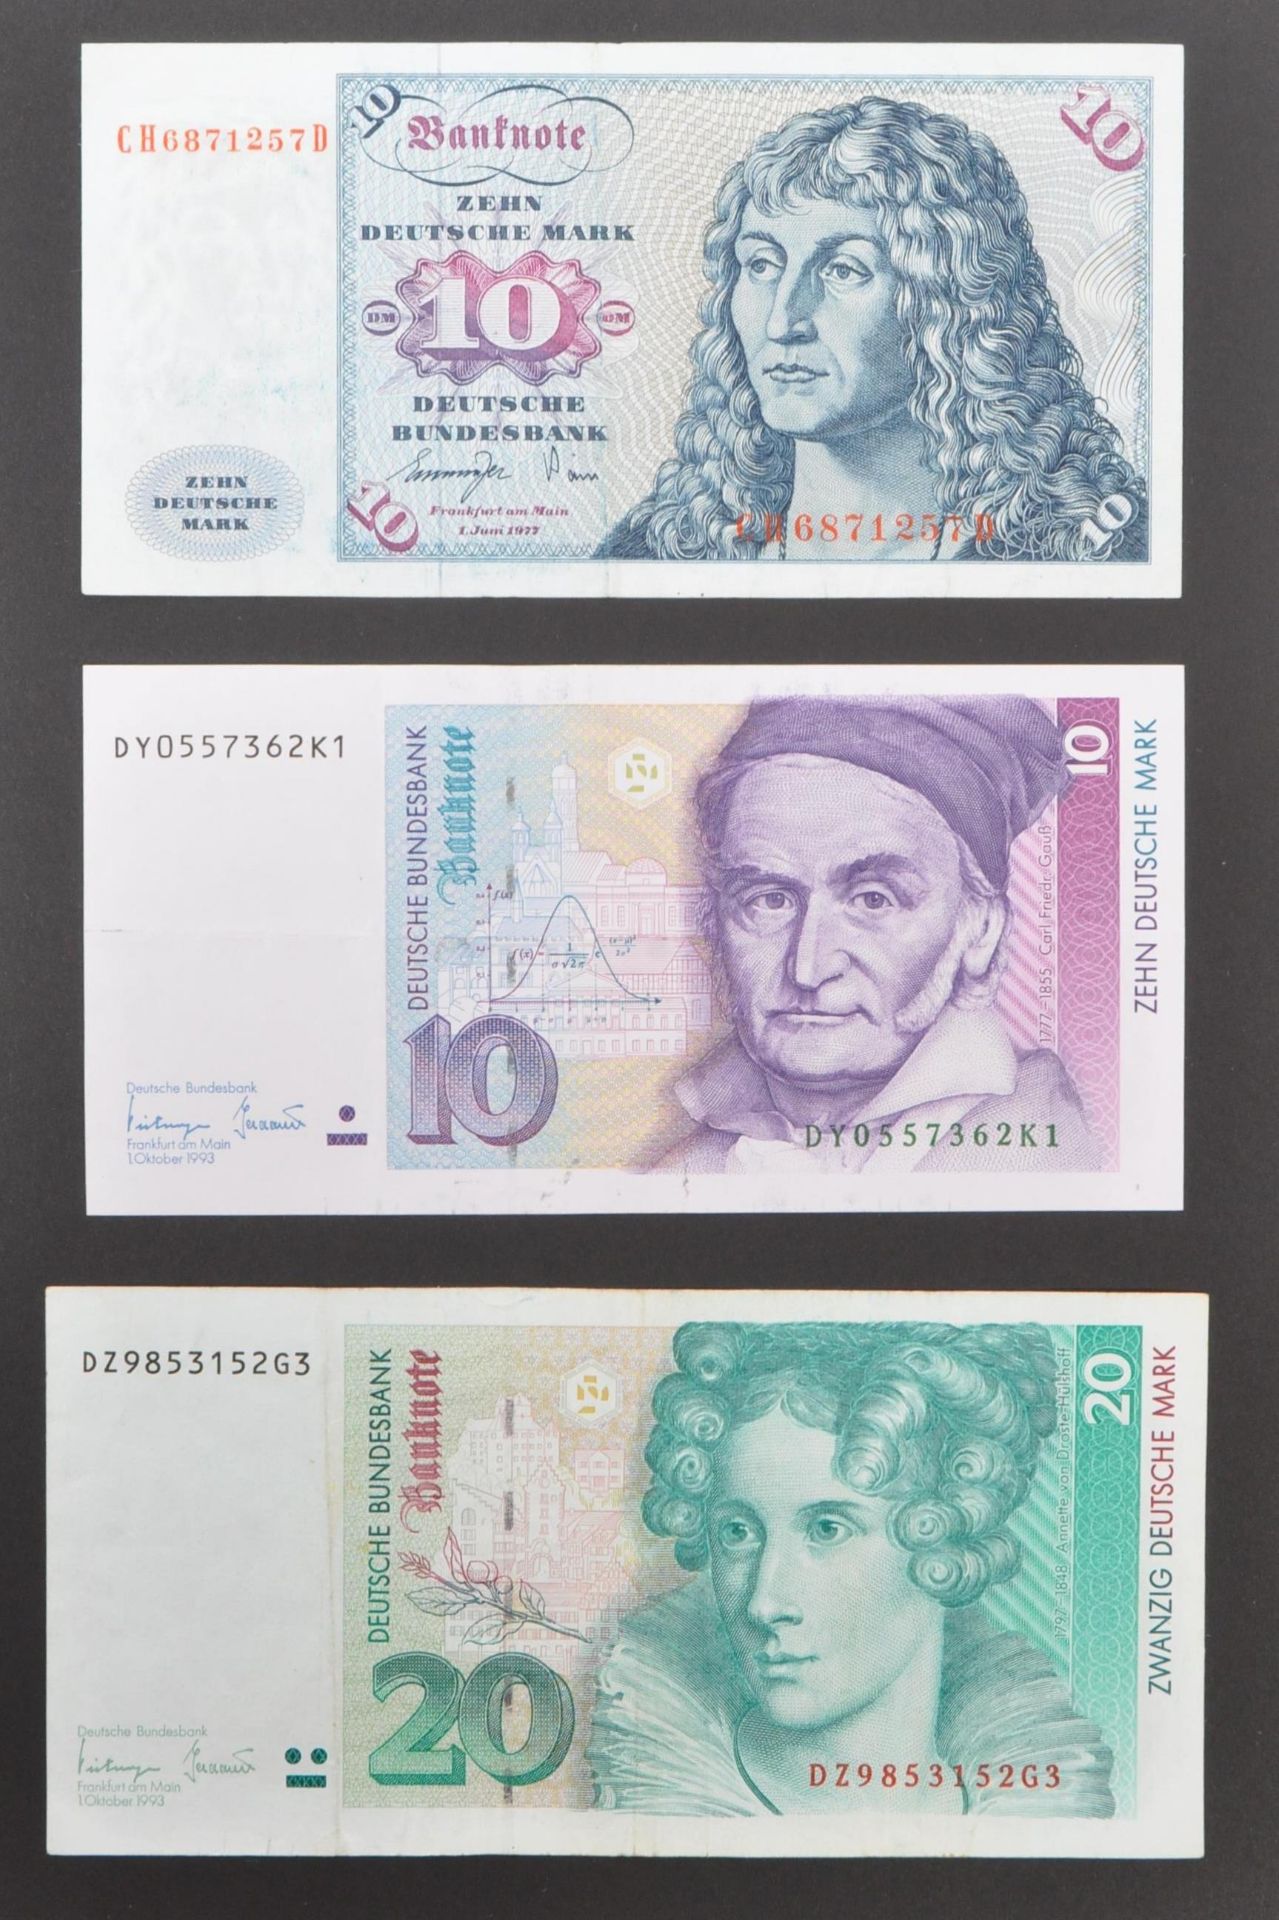 INTERNATIONAL MOSTLY UNCIRCULATED BANK NOTES - EUROPE - Image 3 of 30